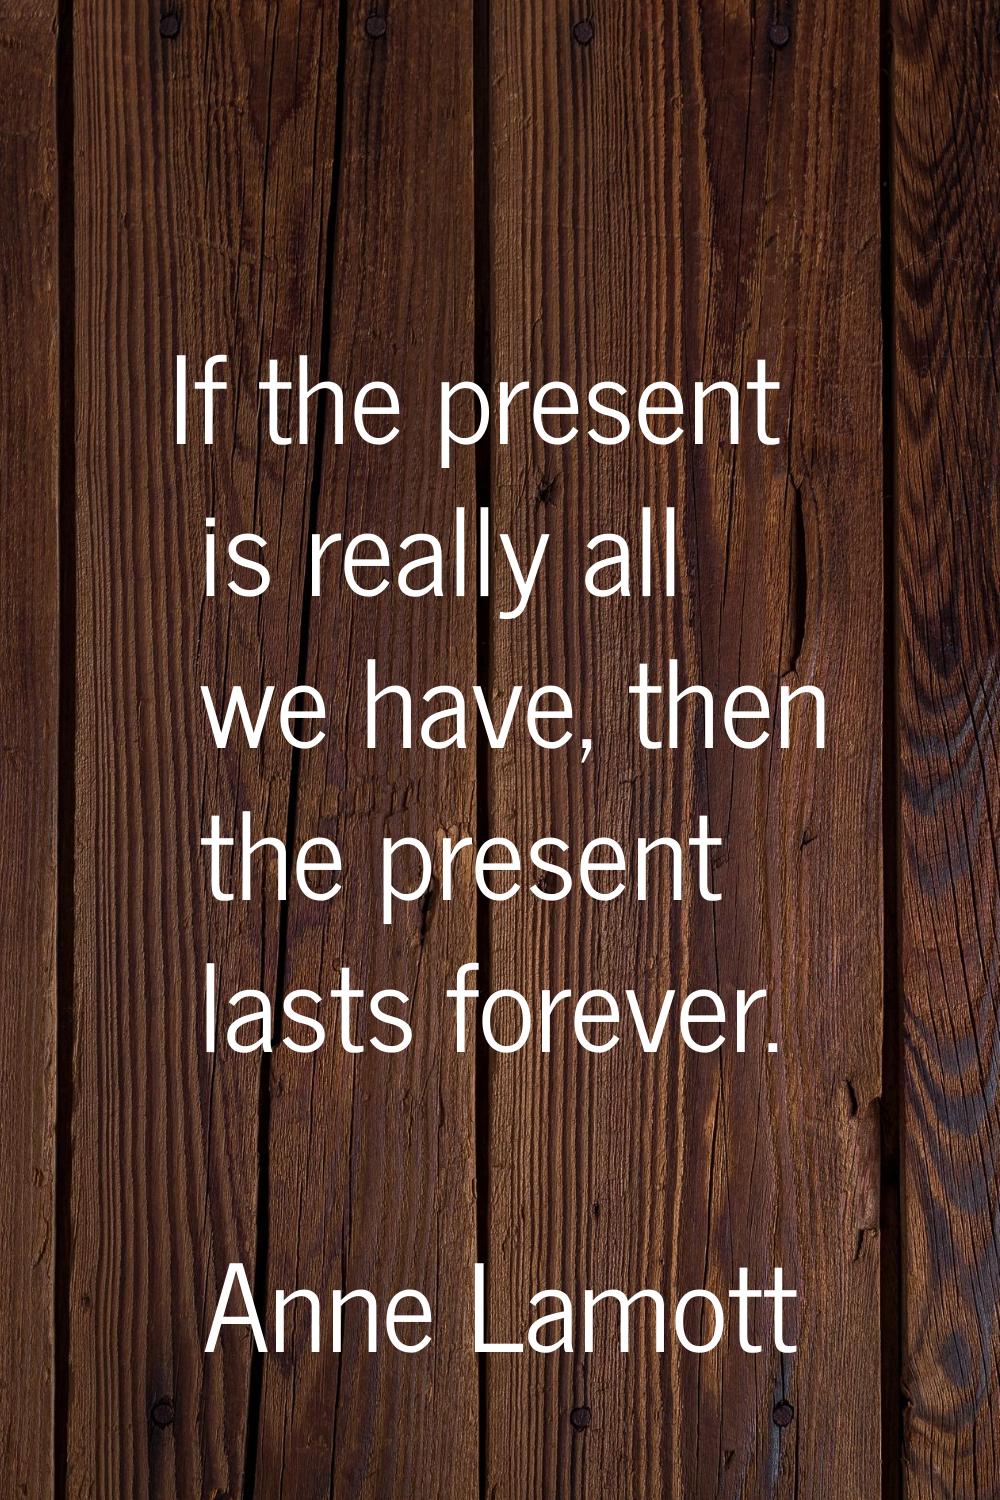 If the present is really all we have, then the present lasts forever.